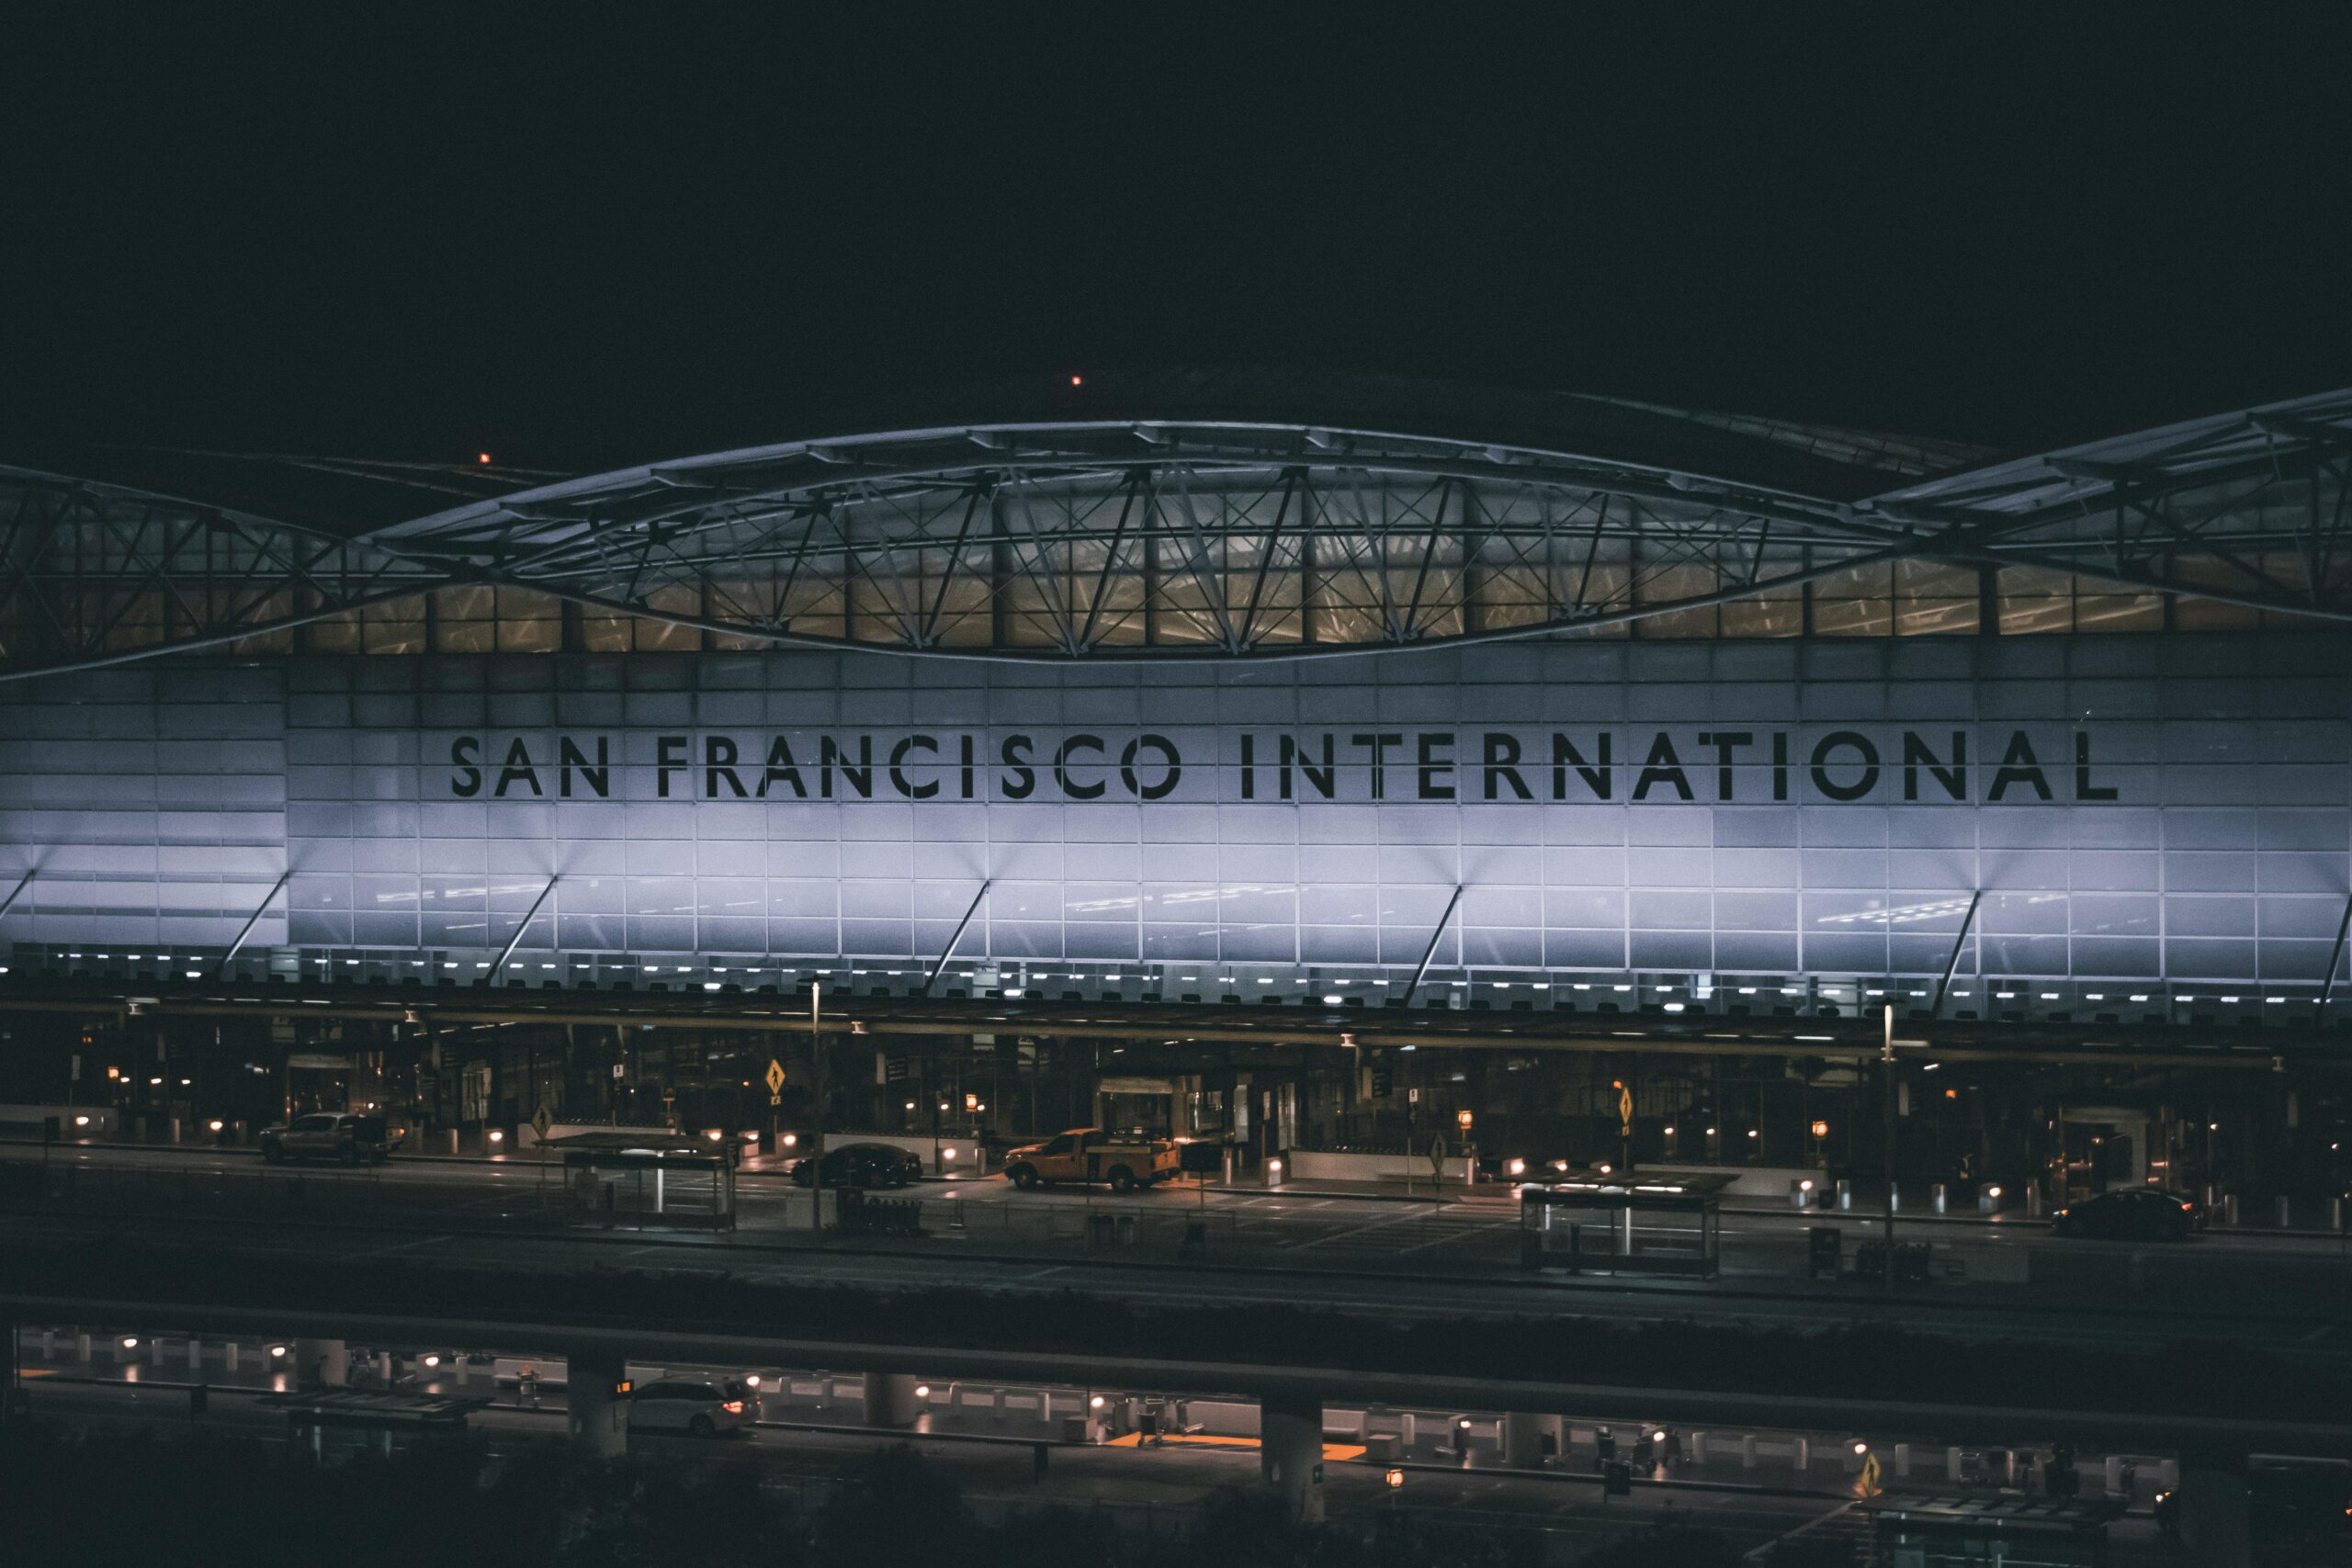 San Francisco International Airport, San Francisco Bay Oakland International Airport, US airports fight over the right to use the name "San Francisco"